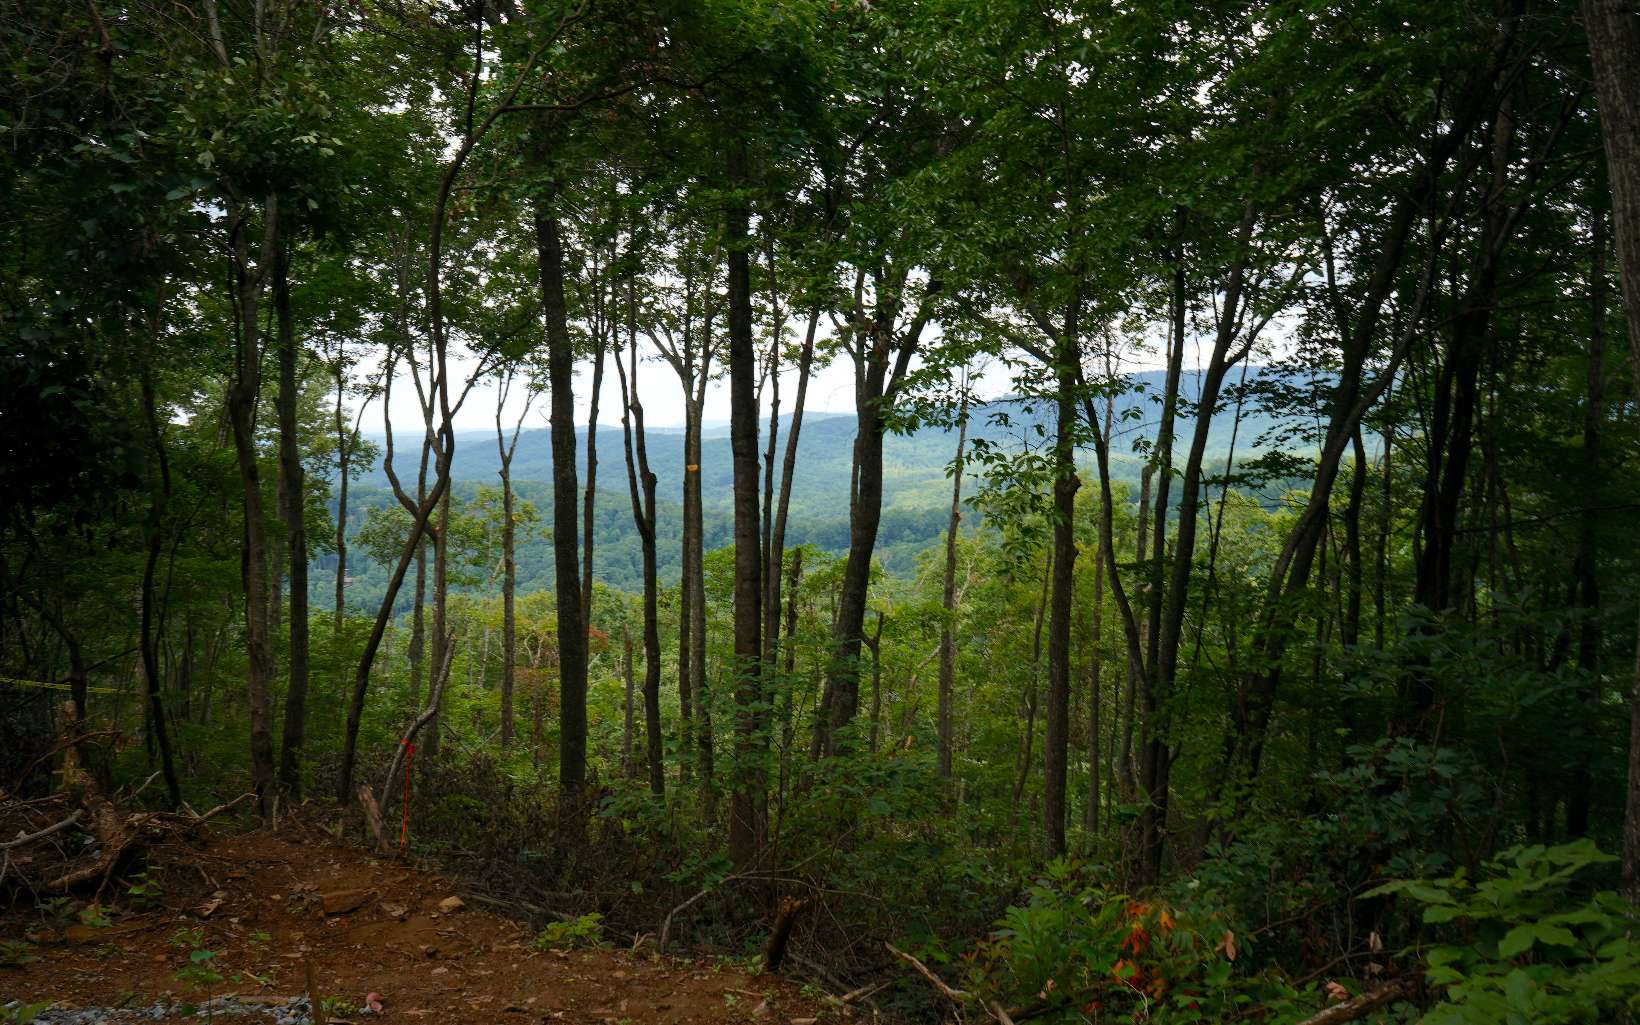 1.54 Acre lot on top of Double Knob Mountain in the exclusive "Eagle's View" subdivision! Seller has already contracted to have well installed. Level 3 soil analysis completed. Underground utilities already in place. Clear some trees to open up an incredible view. Lots 4 and 5 also available for additional privacy. Don't miss out on your chance to own a stunning piece of the North Georgia Mountains!